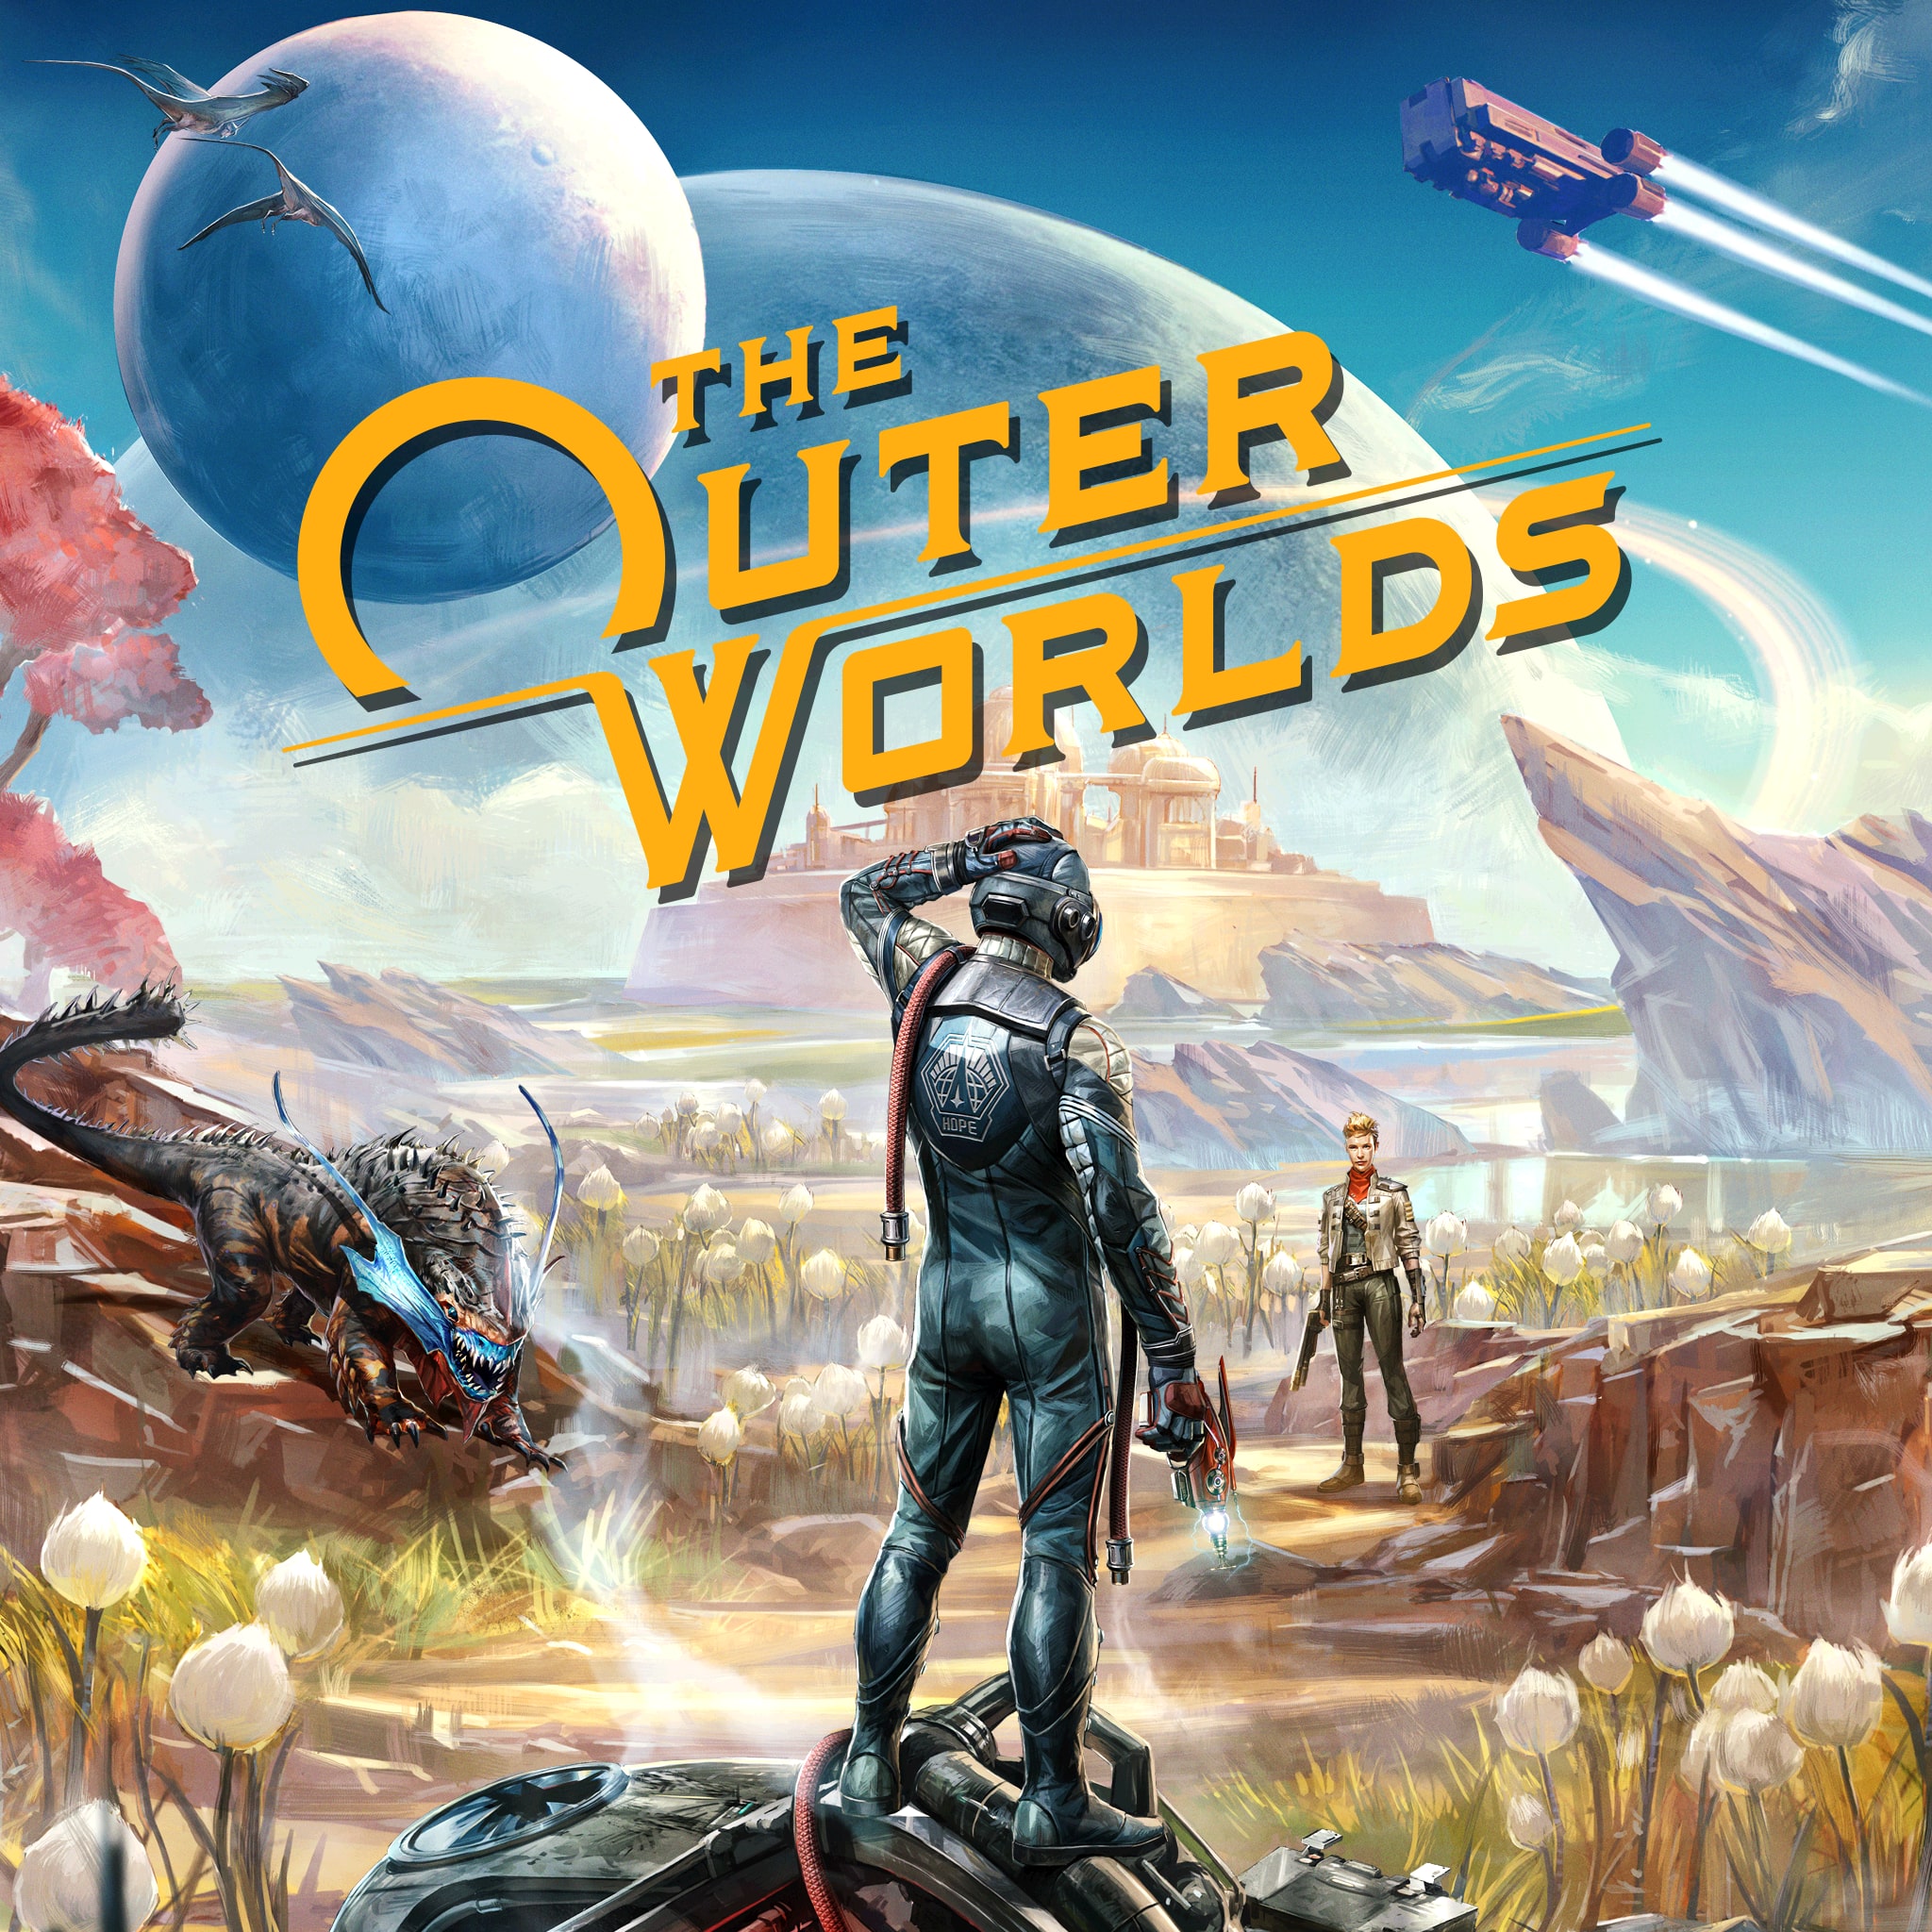 G reform Accord The Outer Worlds - PS4 & PS5 Games | PlayStation (US)